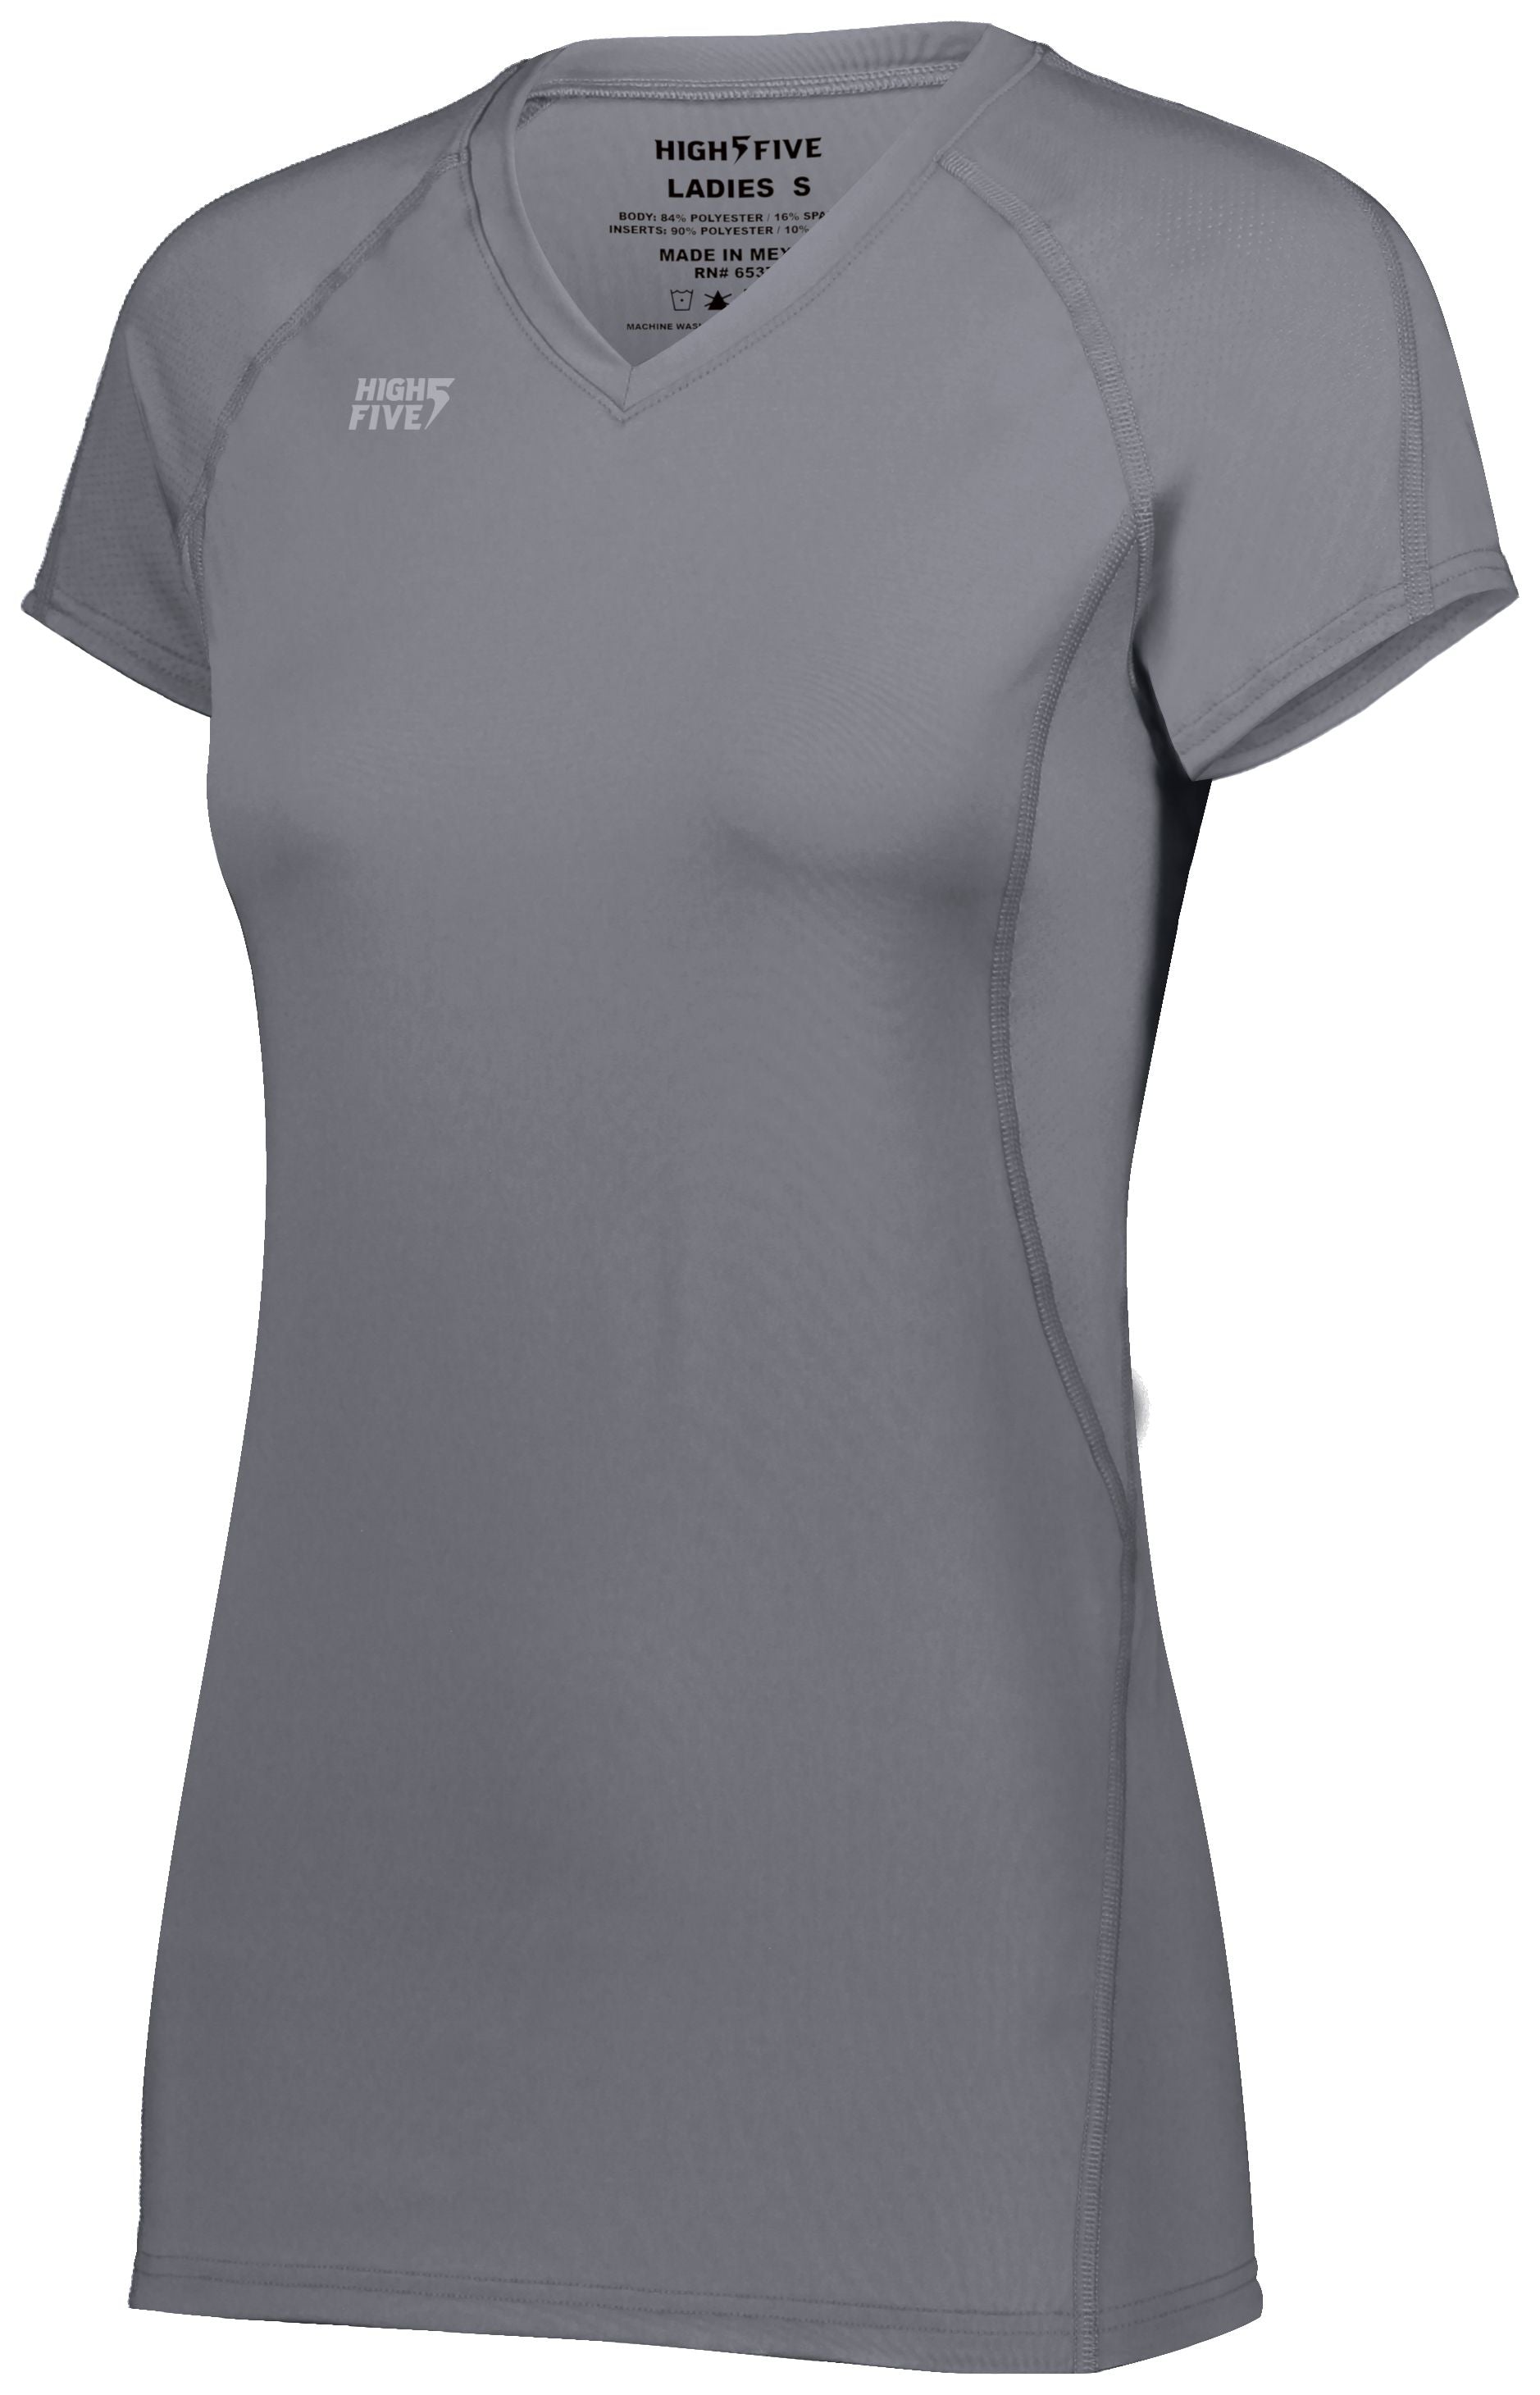 High 5 Ladies Truhit Short Sleeve Jersey in Graphite  -Part of the Ladies, Ladies-Jersey, High5-Products, Volleyball, Shirts product lines at KanaleyCreations.com